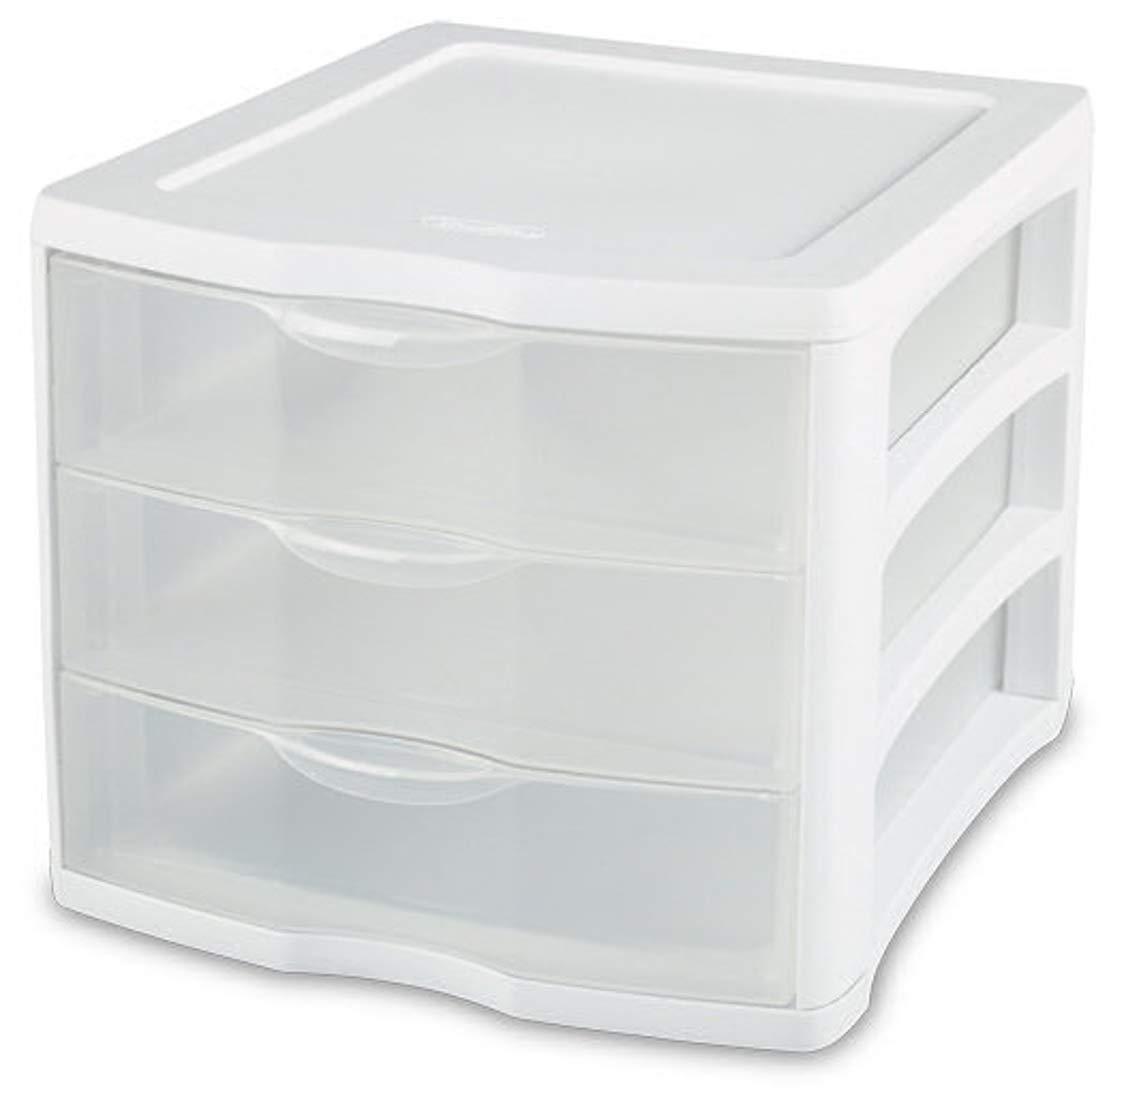 Budget friendly 3 unit plastic shelves drawer organizer shelving storage solution stackable with clear drawer handles for home office supplies school kids cabinets dresser makeup accessory utility white clear 4